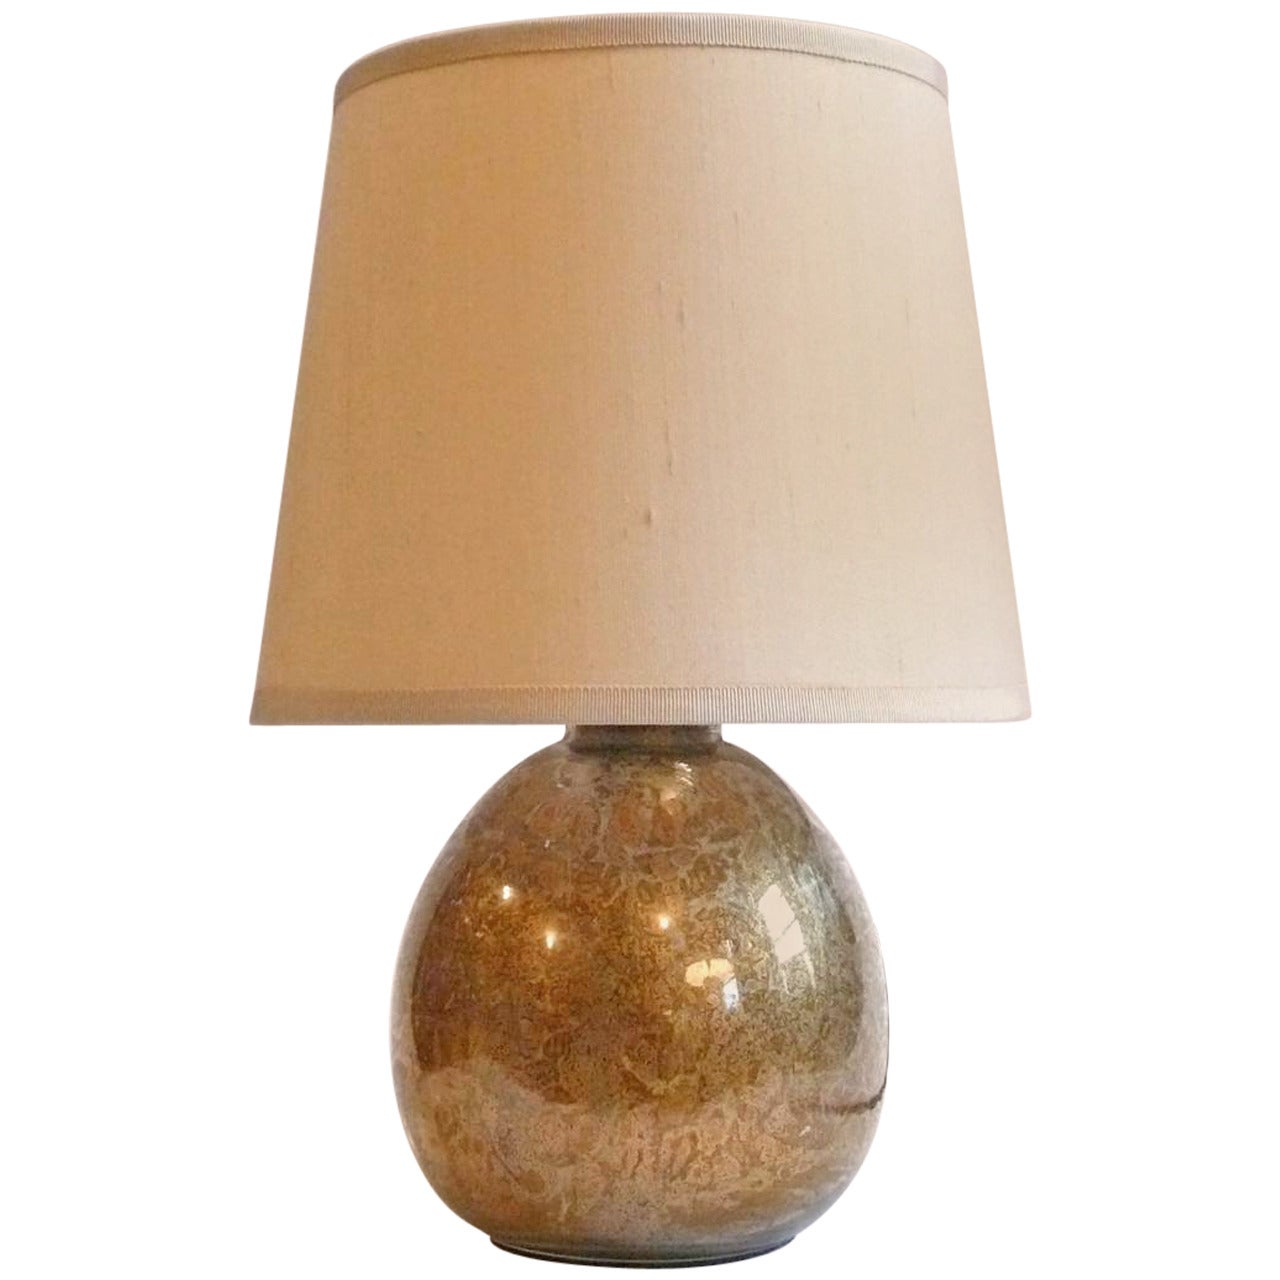 Verre Eglomise Lamp For Sale